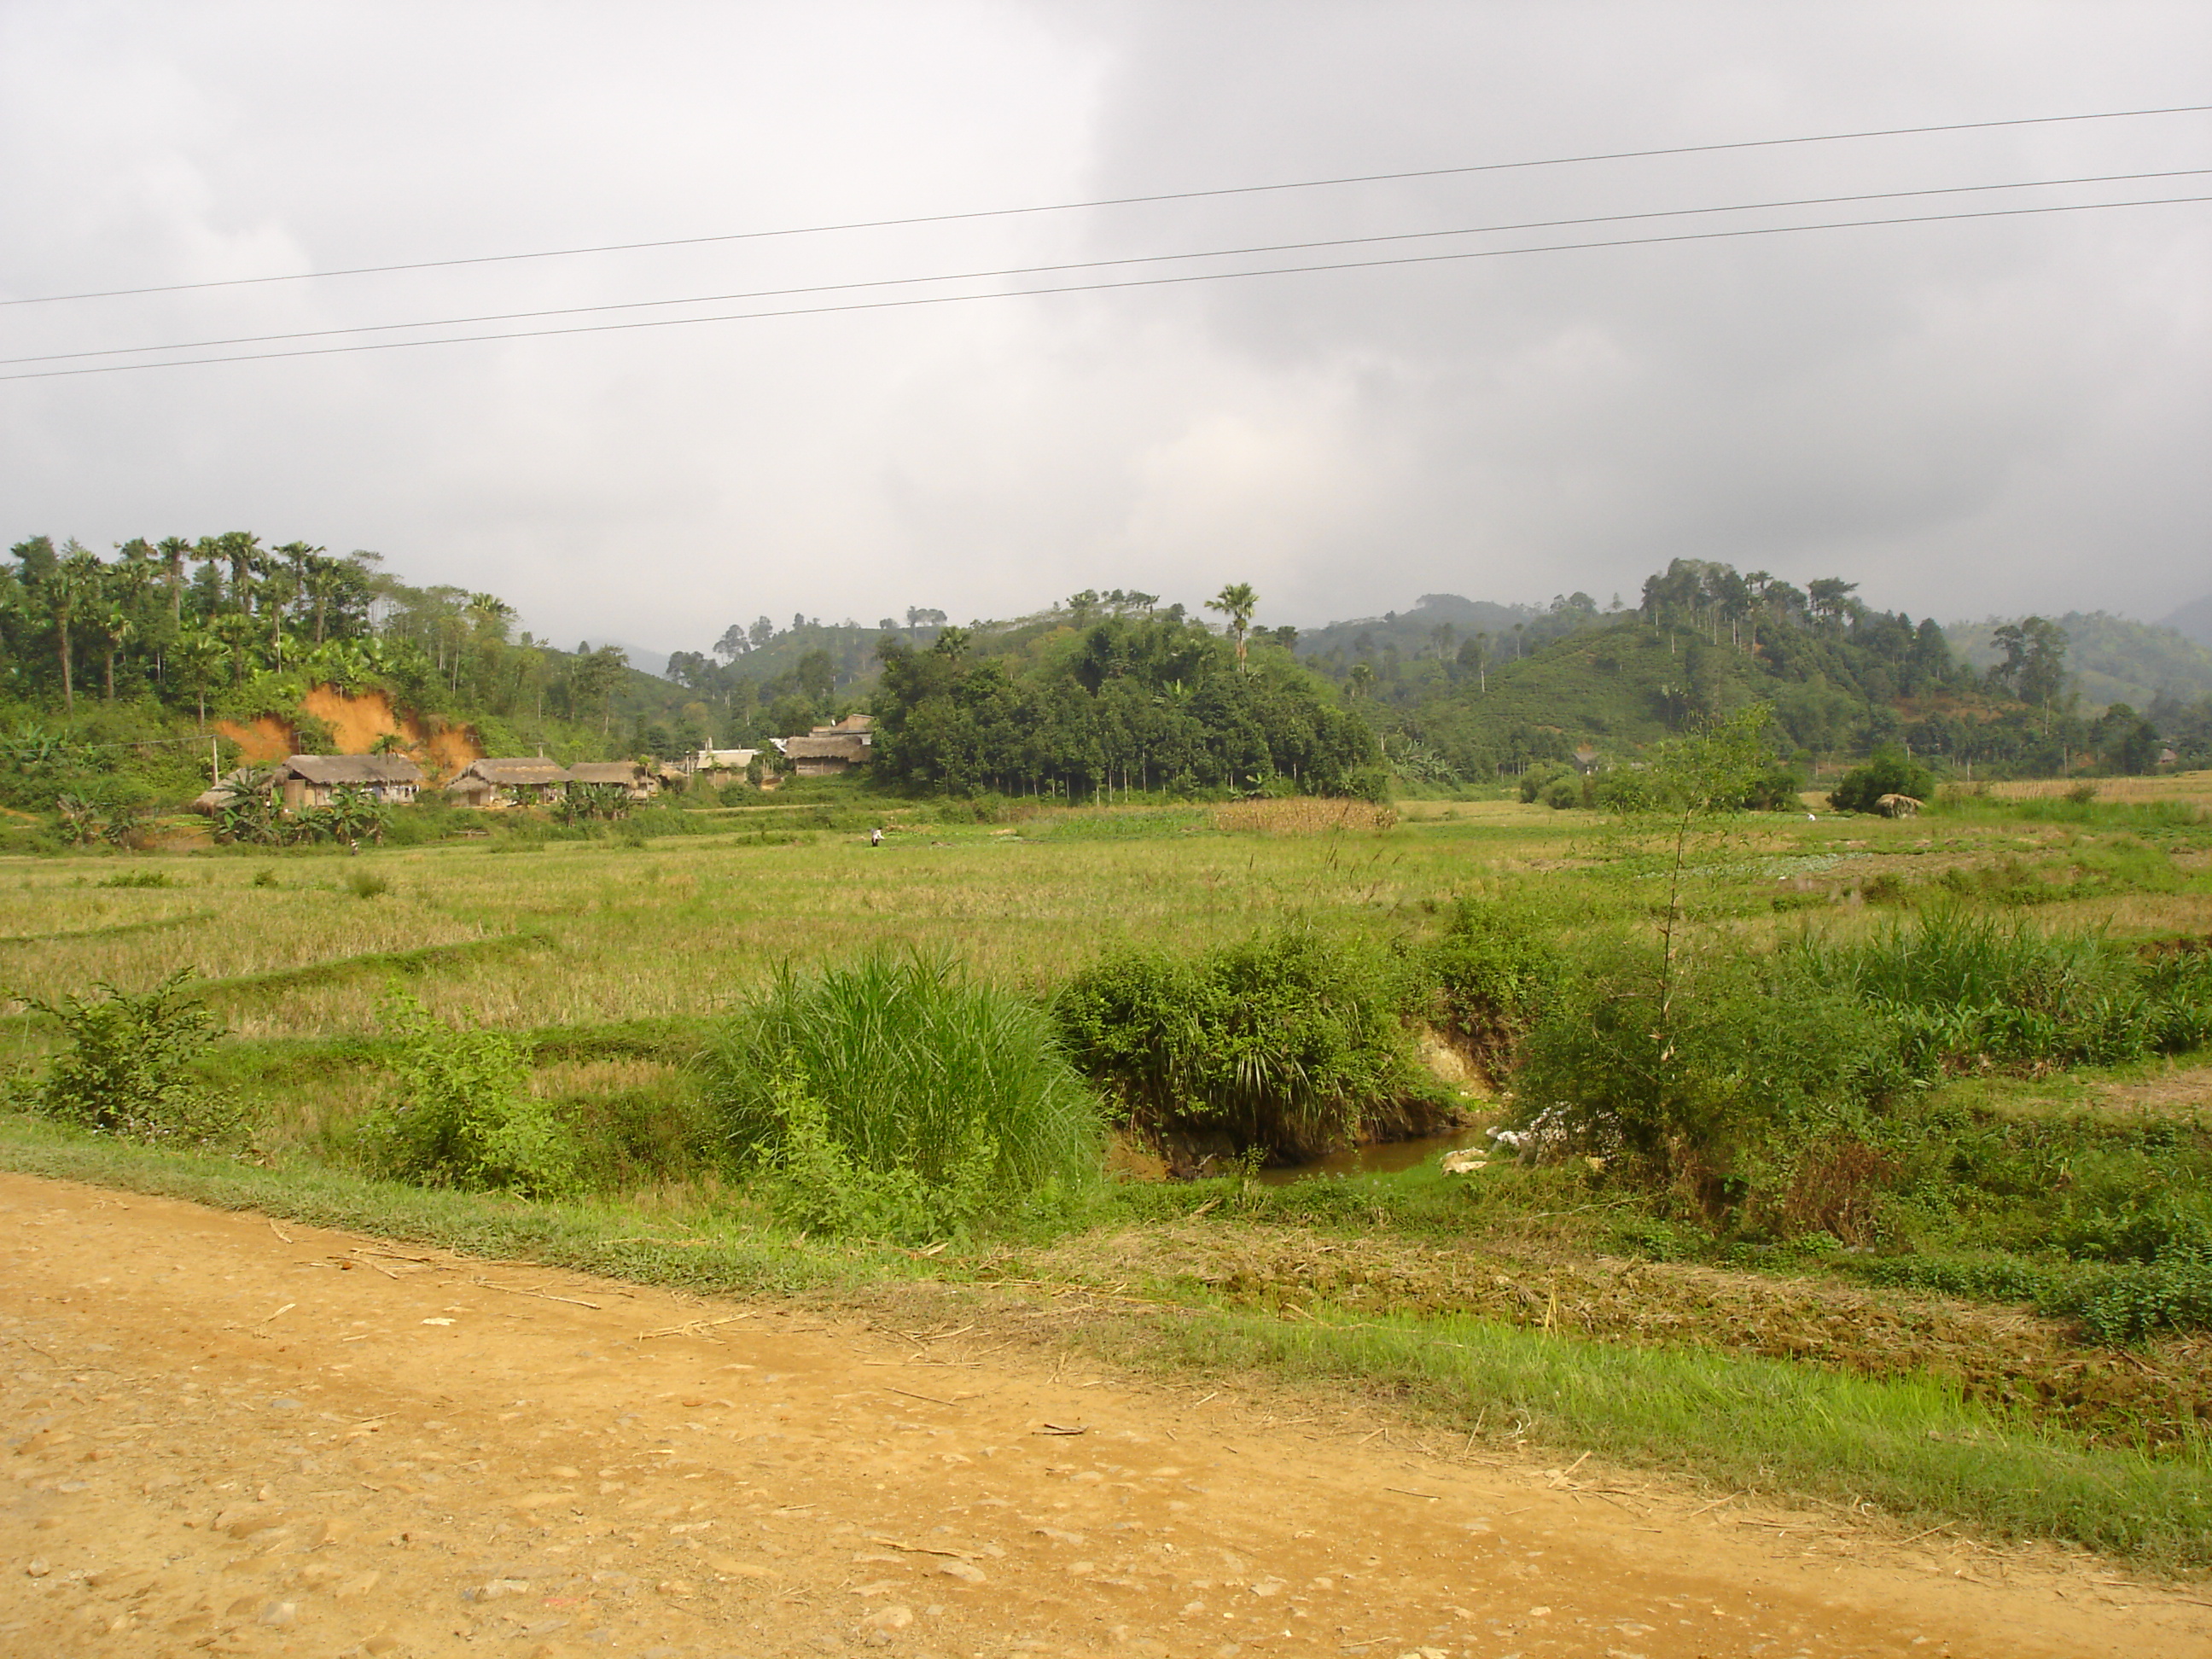 Photo taken during implementation of a demonstration program to reduce the burden of anaemia and hookworm in women in Yên Bái Province, Viet Nam. Picture shows dirt road in the foreground, with a small tract of farmland interspersed with forested areas. There is a small village of three or four houses on the far-side of the farmland. The weather is cloudy.